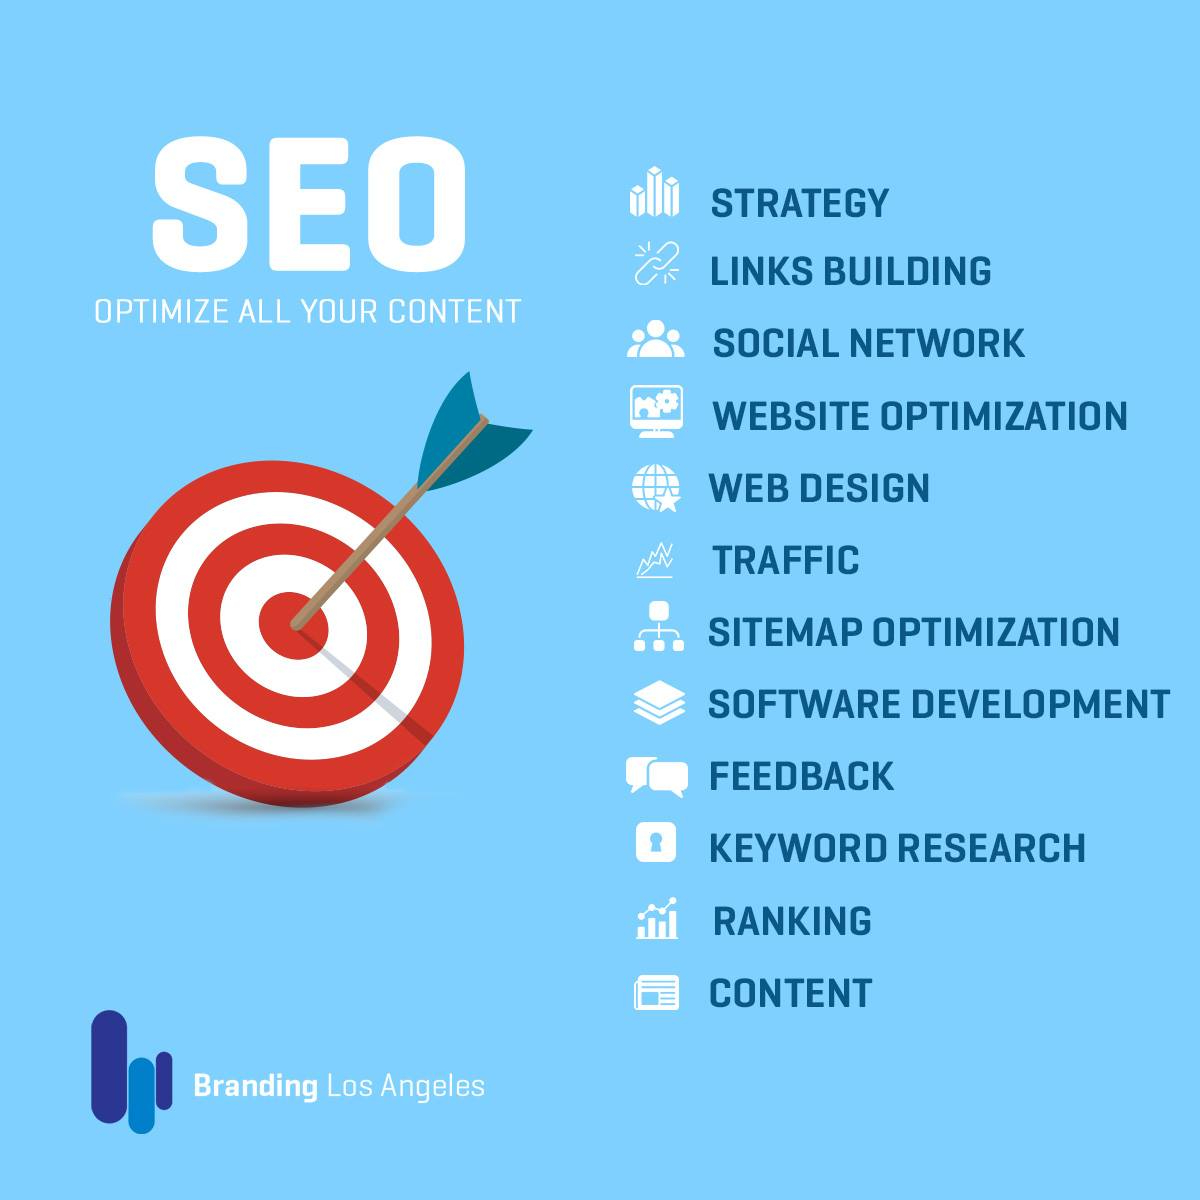 Optimize all your content so that your target audience can find you no matter where they may be. Visit the link below to see how we can assist you. - 🎯: bit.ly/32elwIc #SEO #WebsiteRanking #MarketingTips #MarketingStrategy